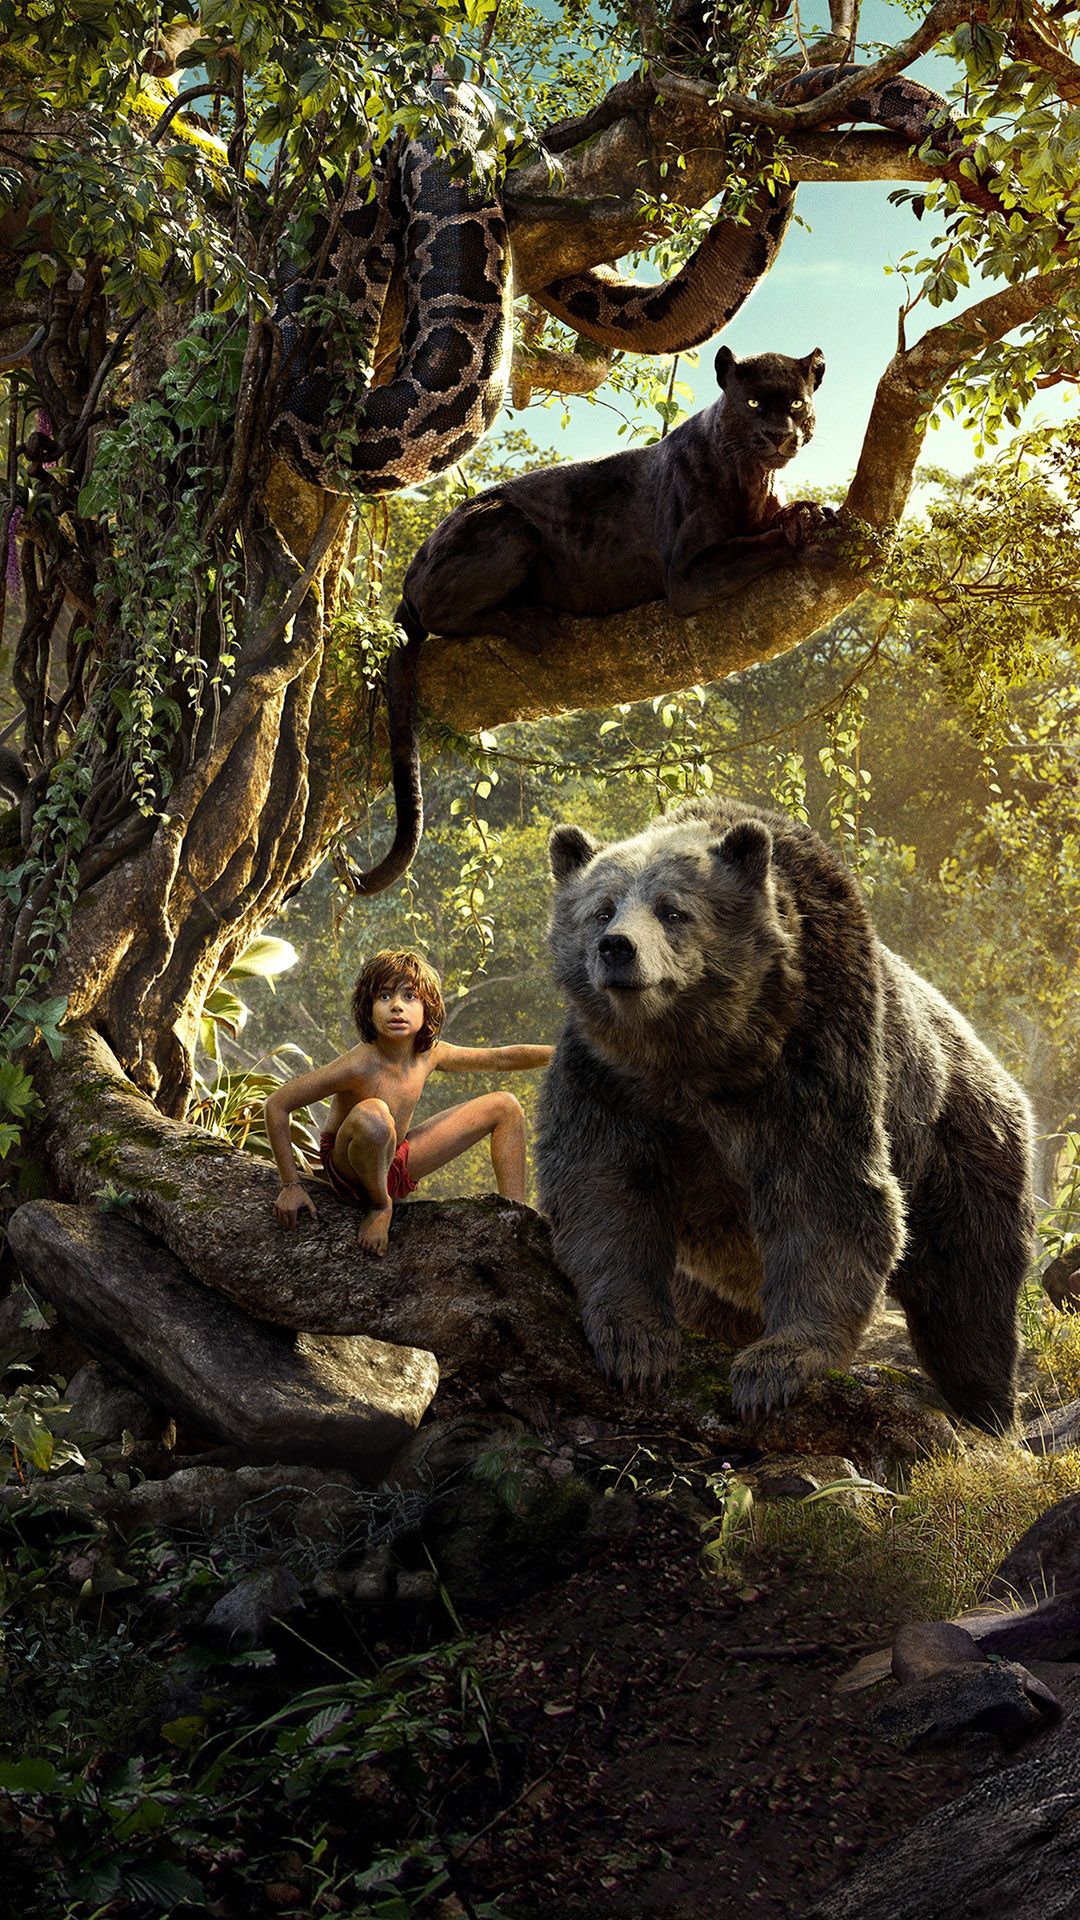 The Jungle Book 2016 Movie Animated Poster Wallpaper - Jungle Book Movie Posters - HD Wallpaper 